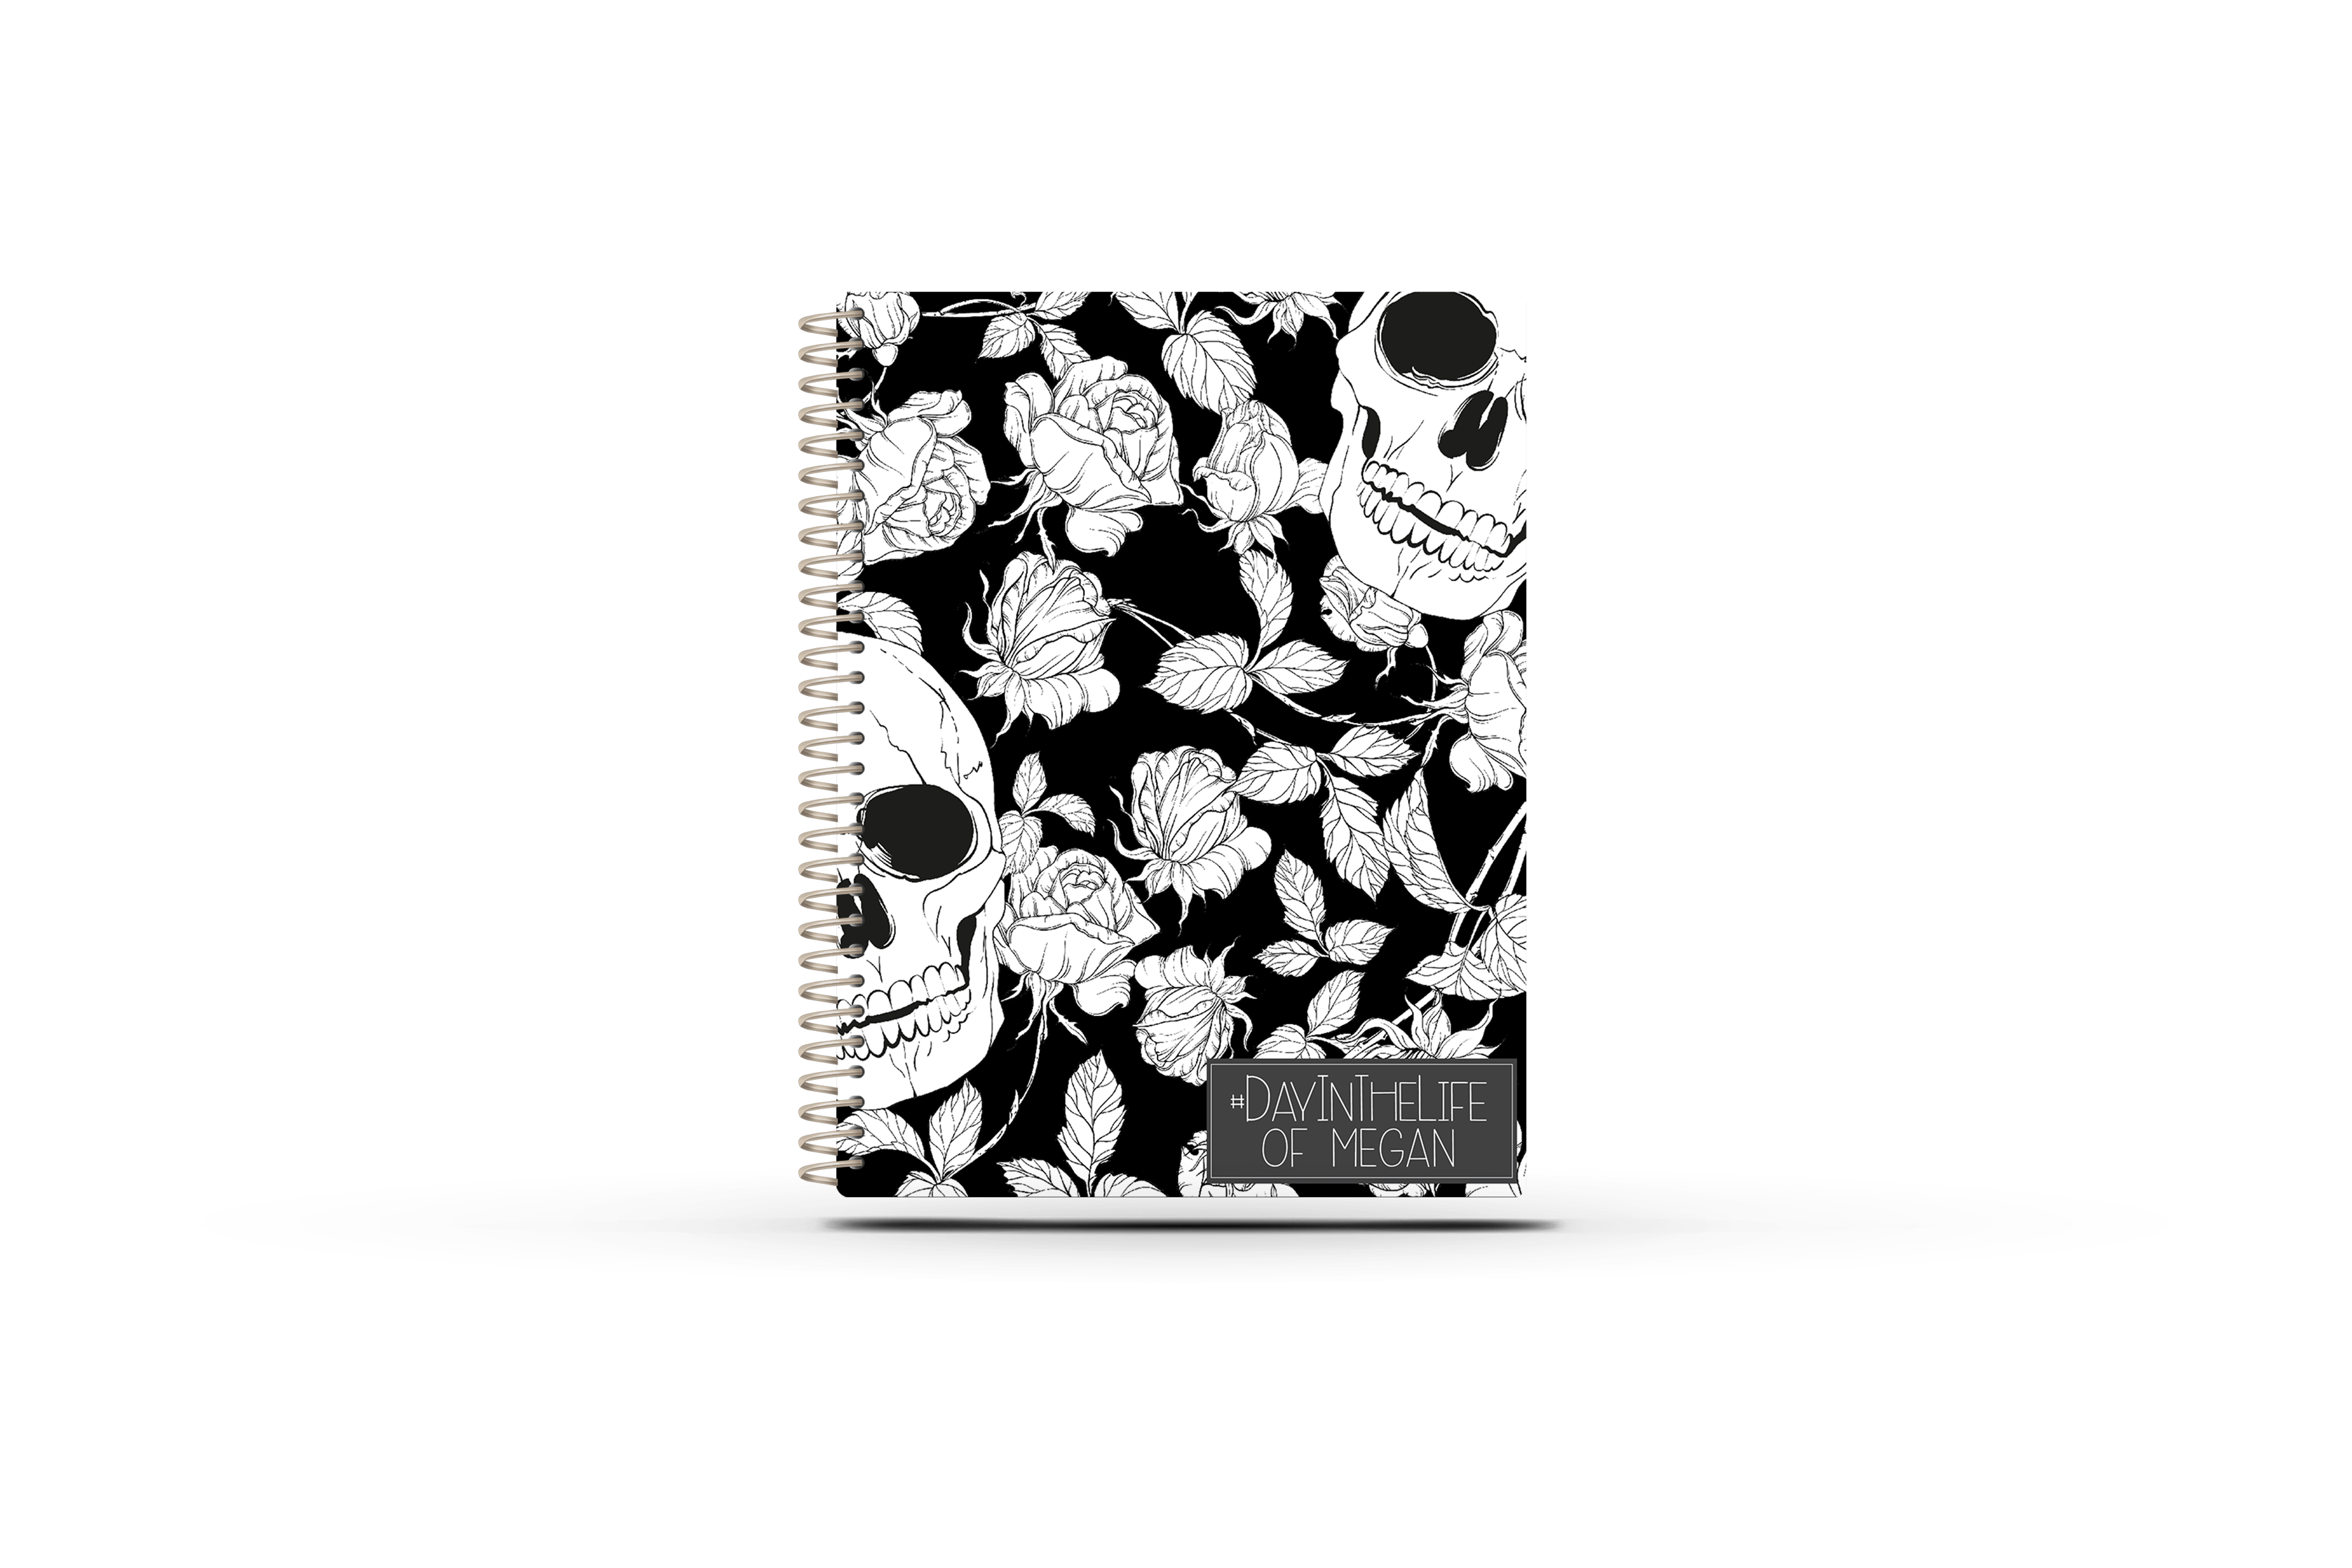 The Chelsea Appointment Book - BW SKULLS